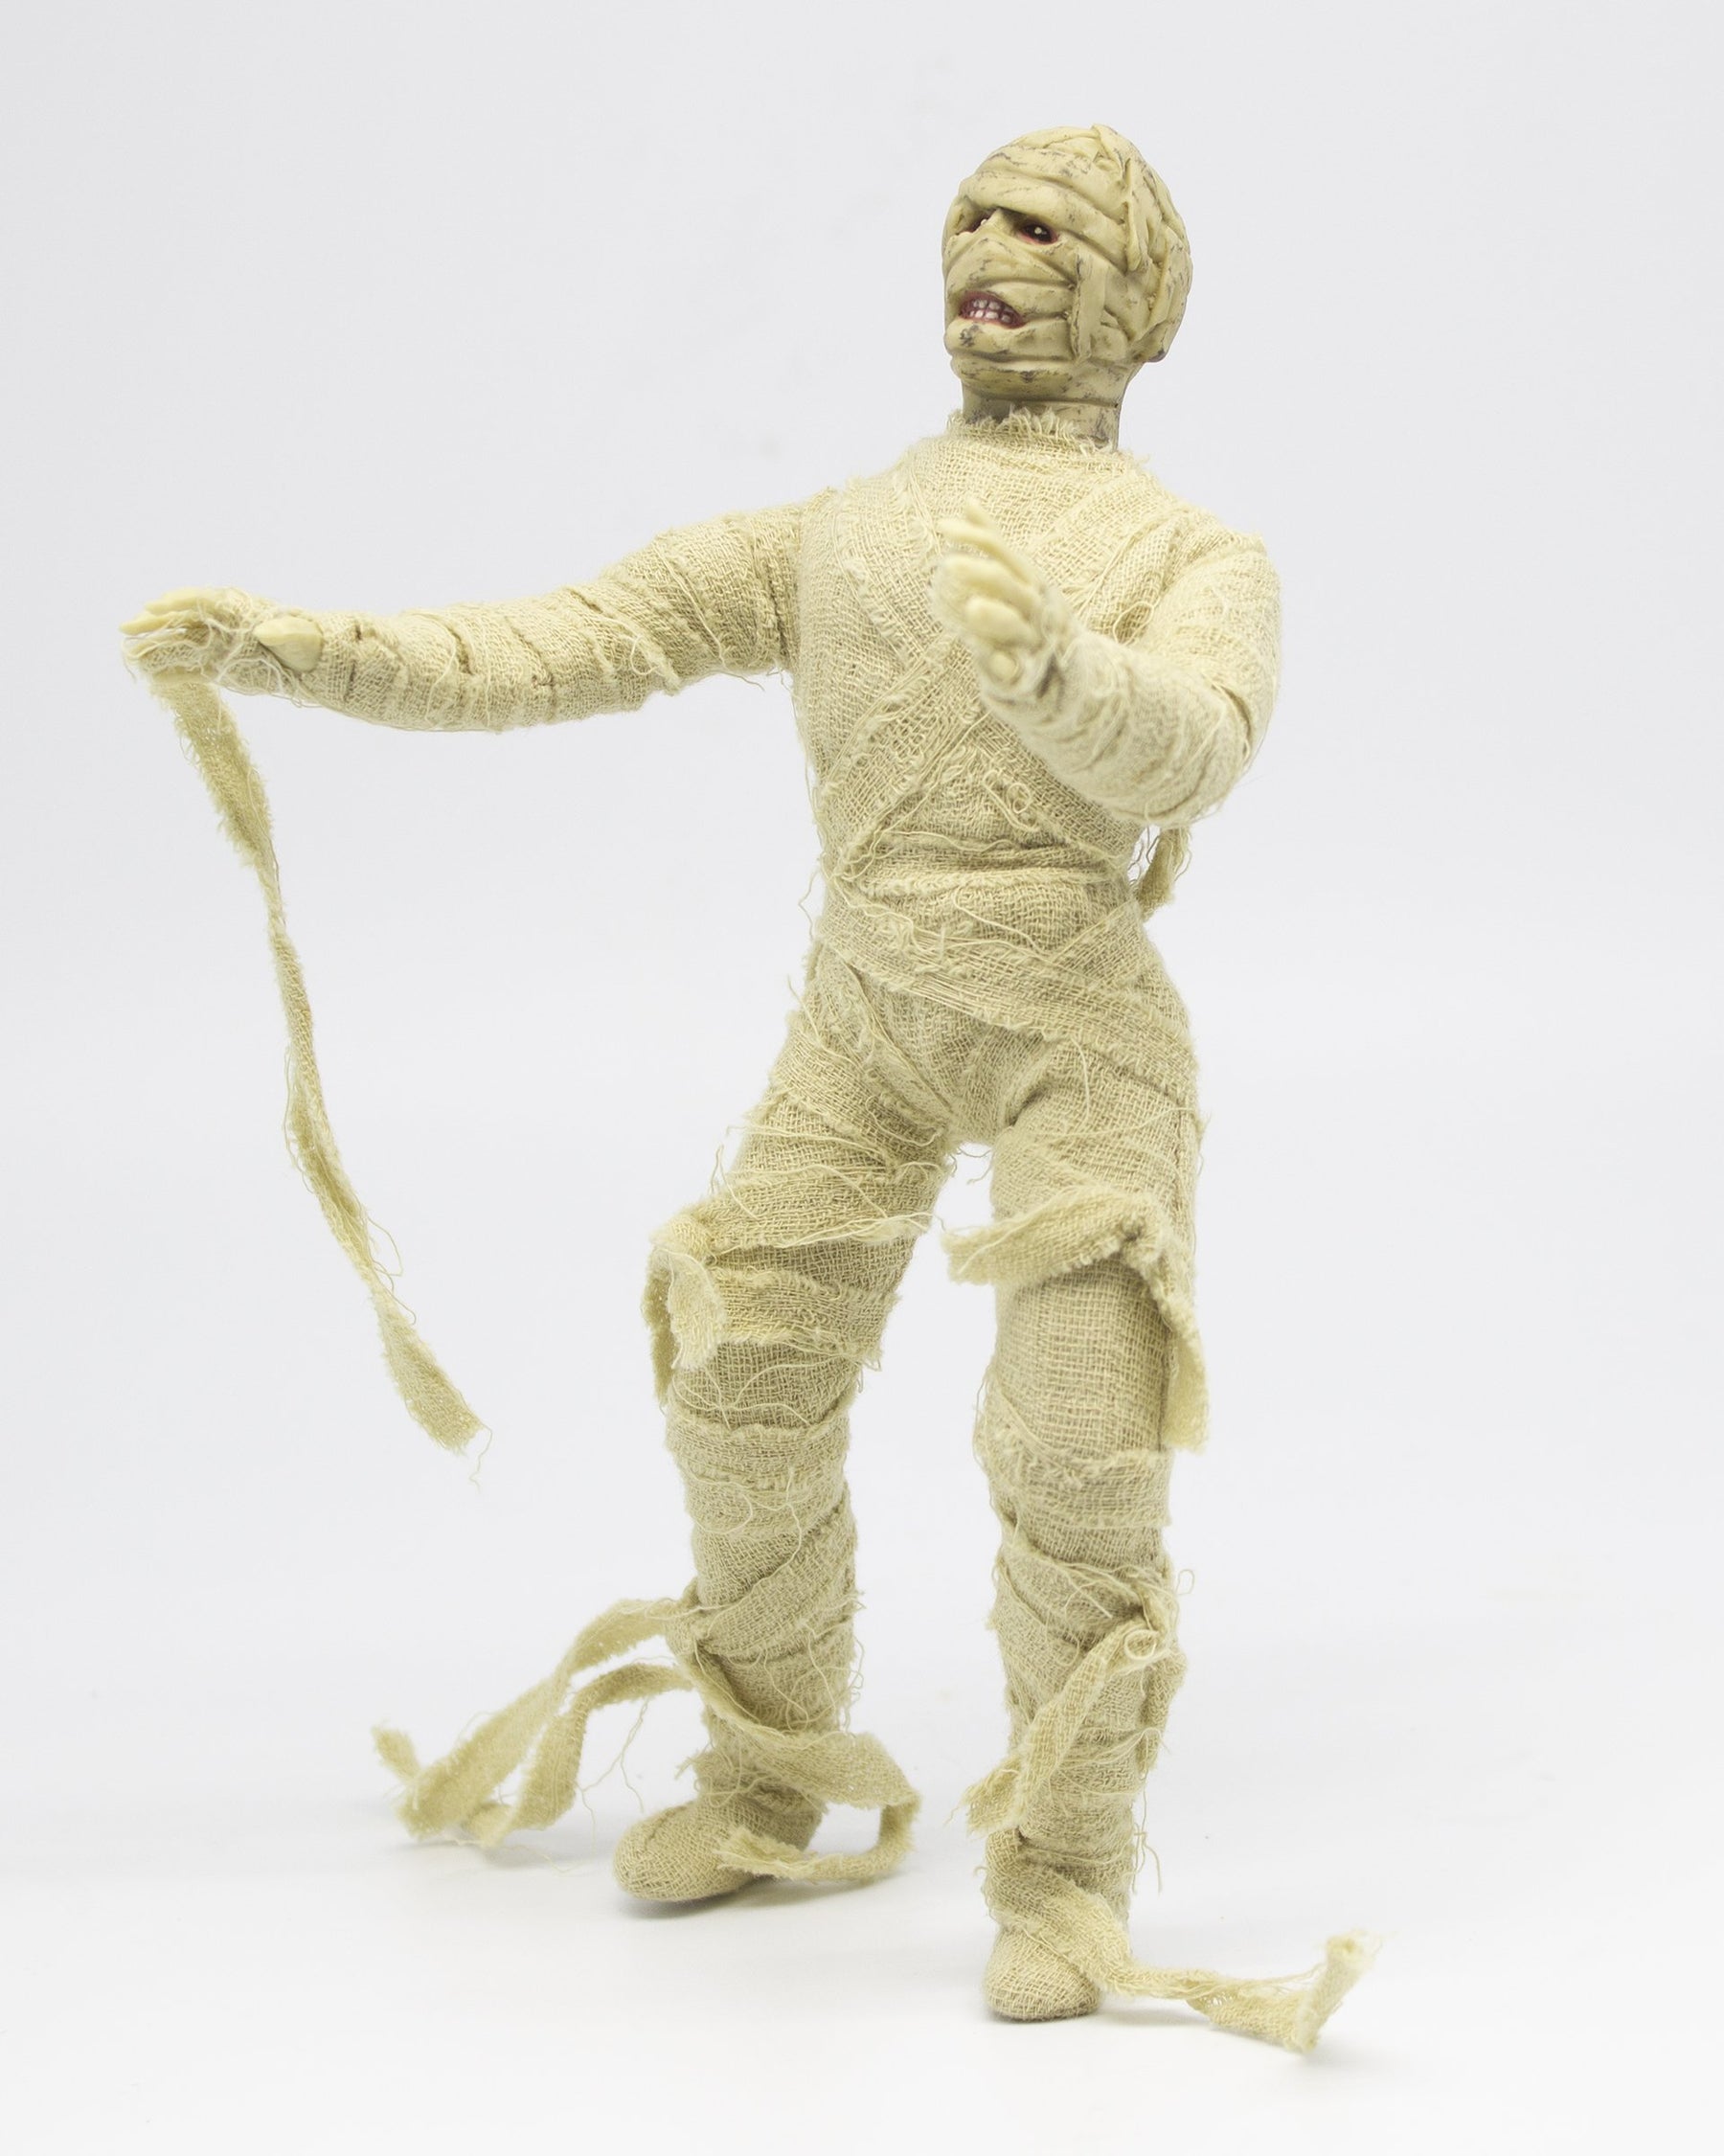 Mego Horror Wave 7 - The Mummy 8" Action Figure - Zlc Collectibles